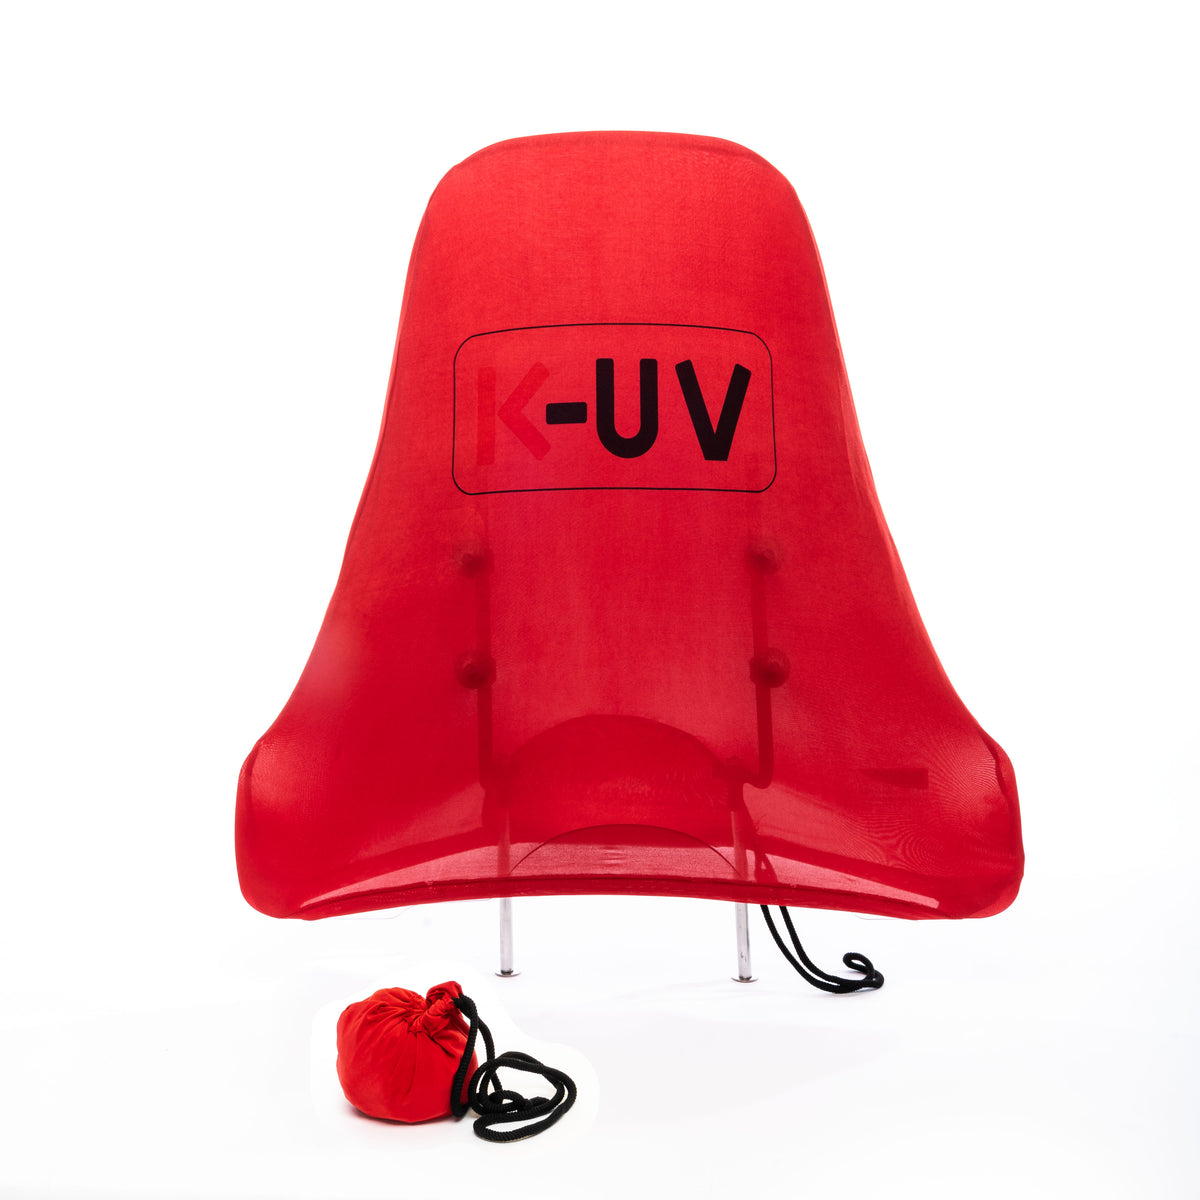 K-UV® protects the windshield and the bodywork of your scooter from the sun. Avoid the lens effect on the body of your scooter. K-UV® Original Patented